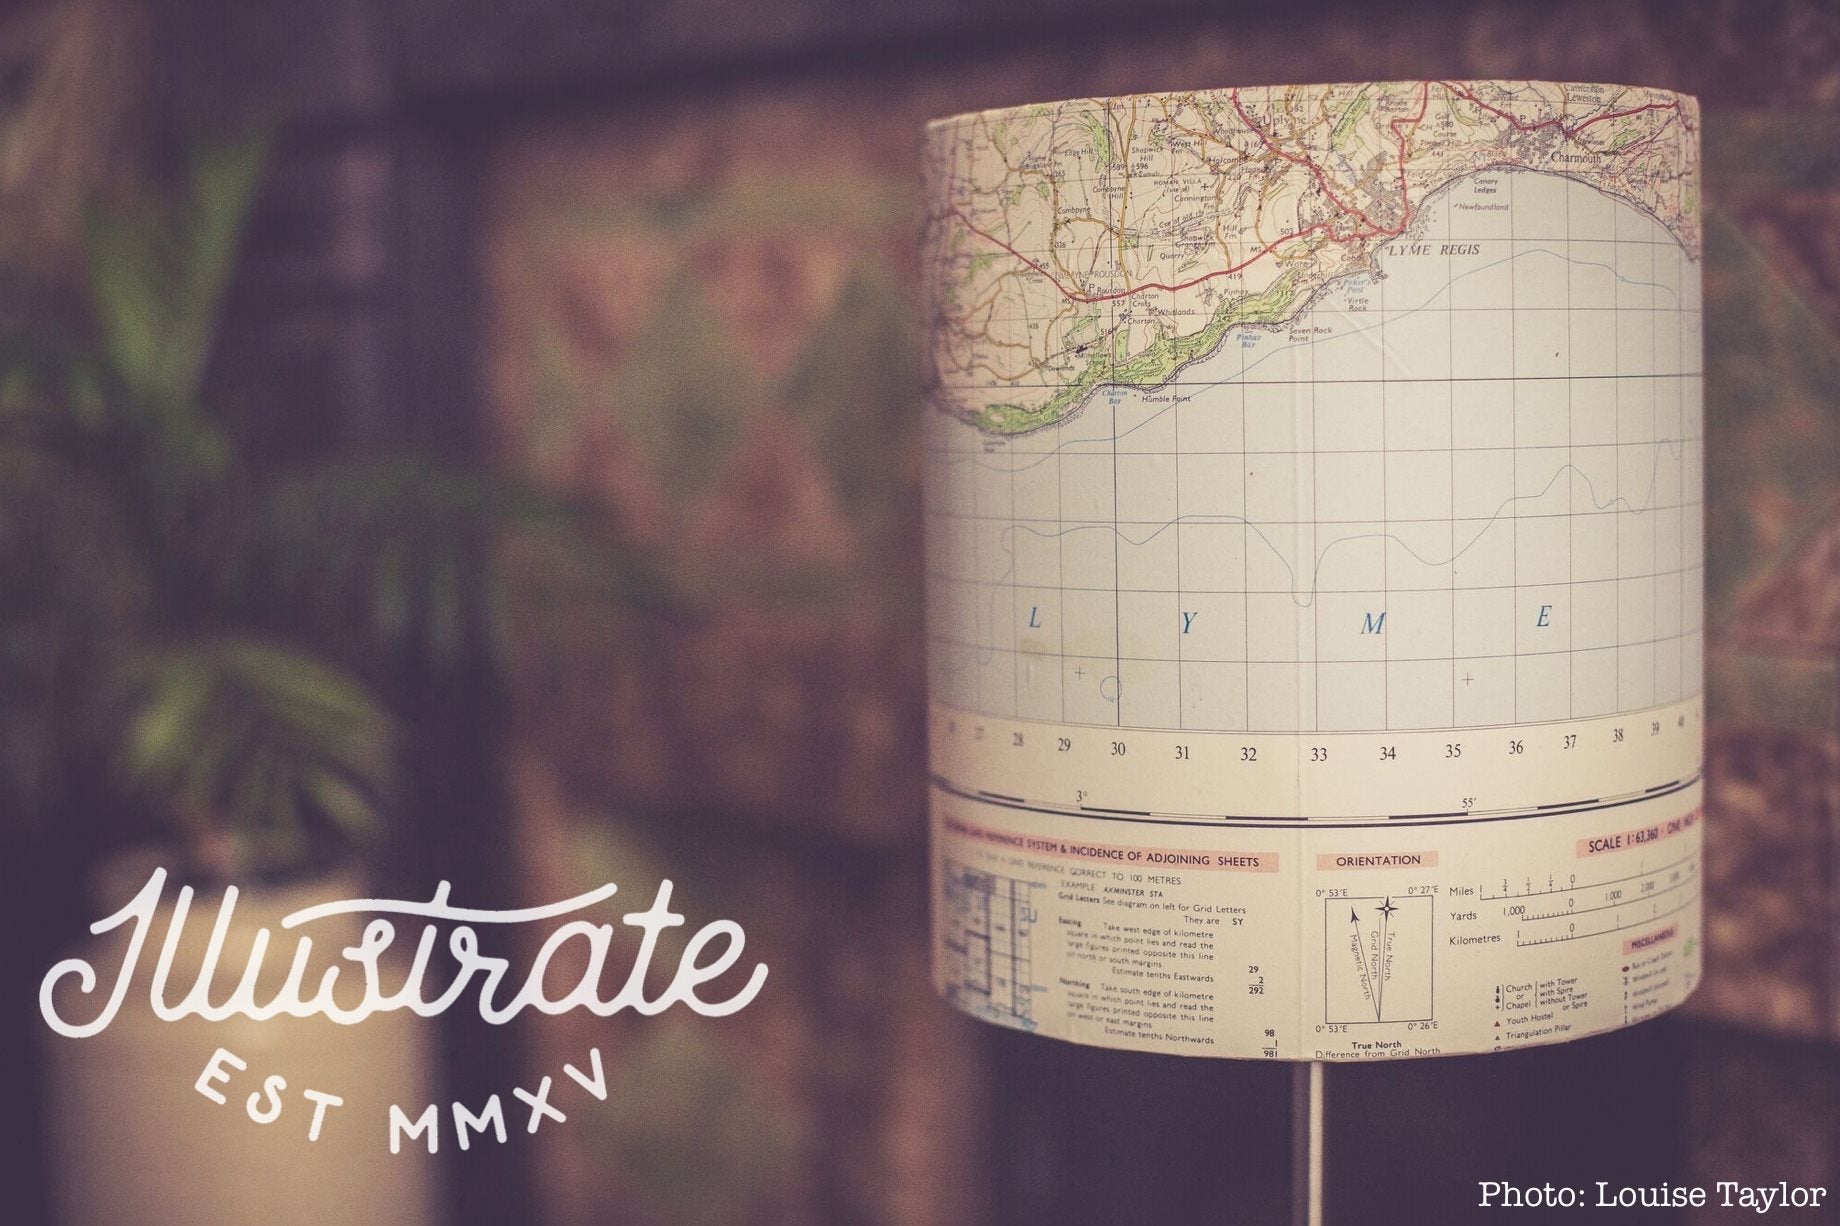 A DIY lampshade made from an upcycled old map, Illustrate's cursive logo (bottom left)